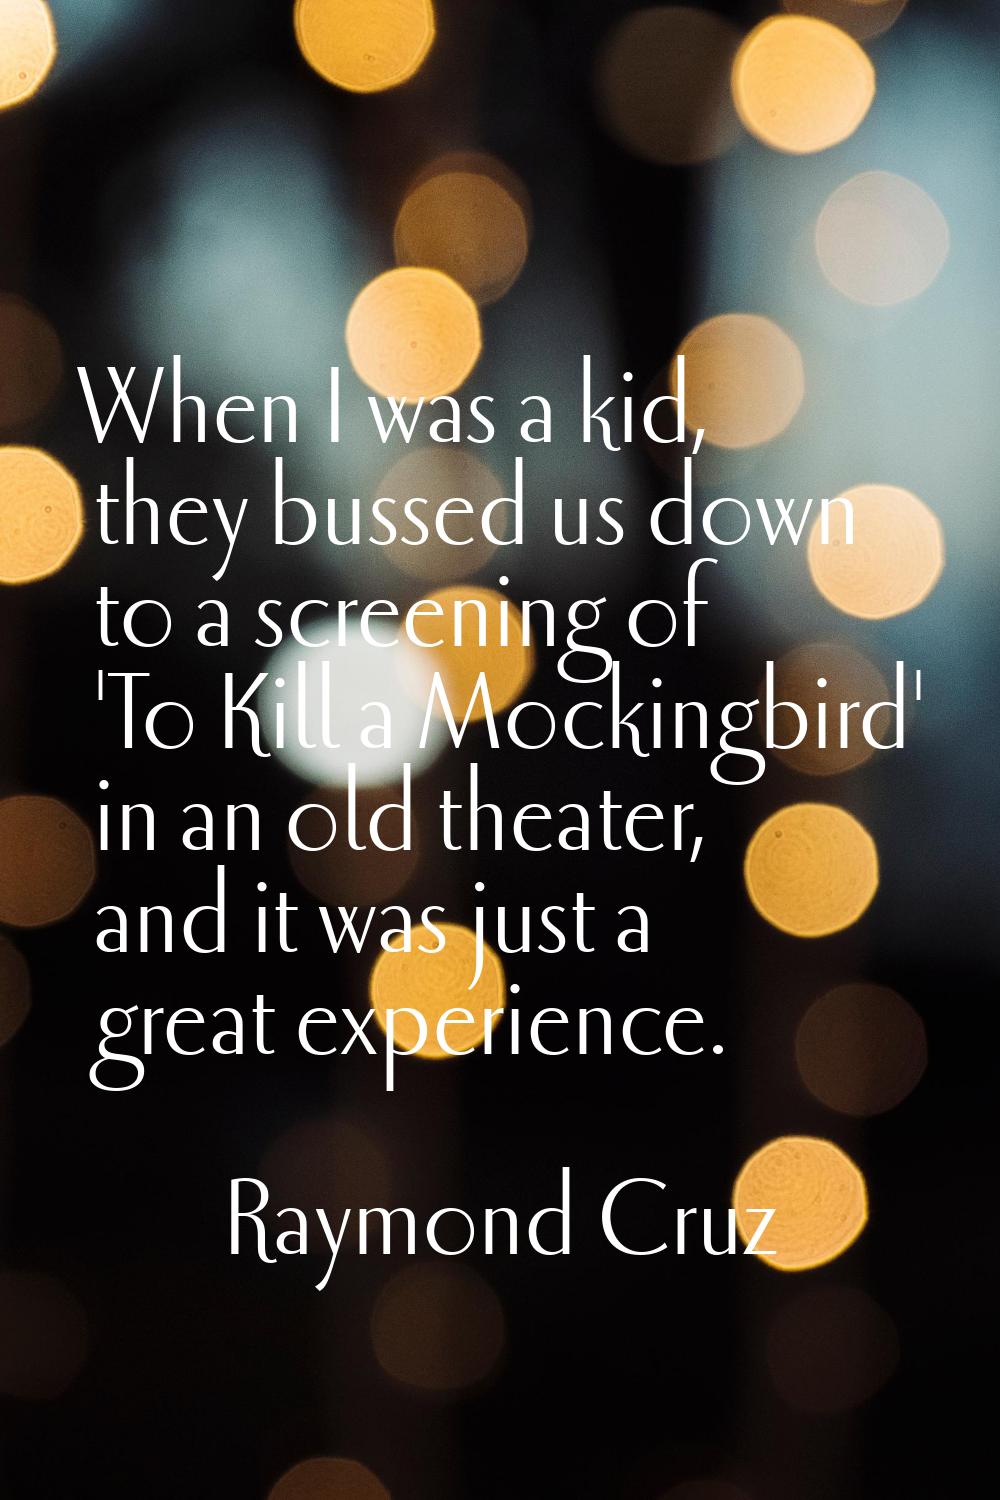 When I was a kid, they bussed us down to a screening of 'To Kill a Mockingbird' in an old theater, 